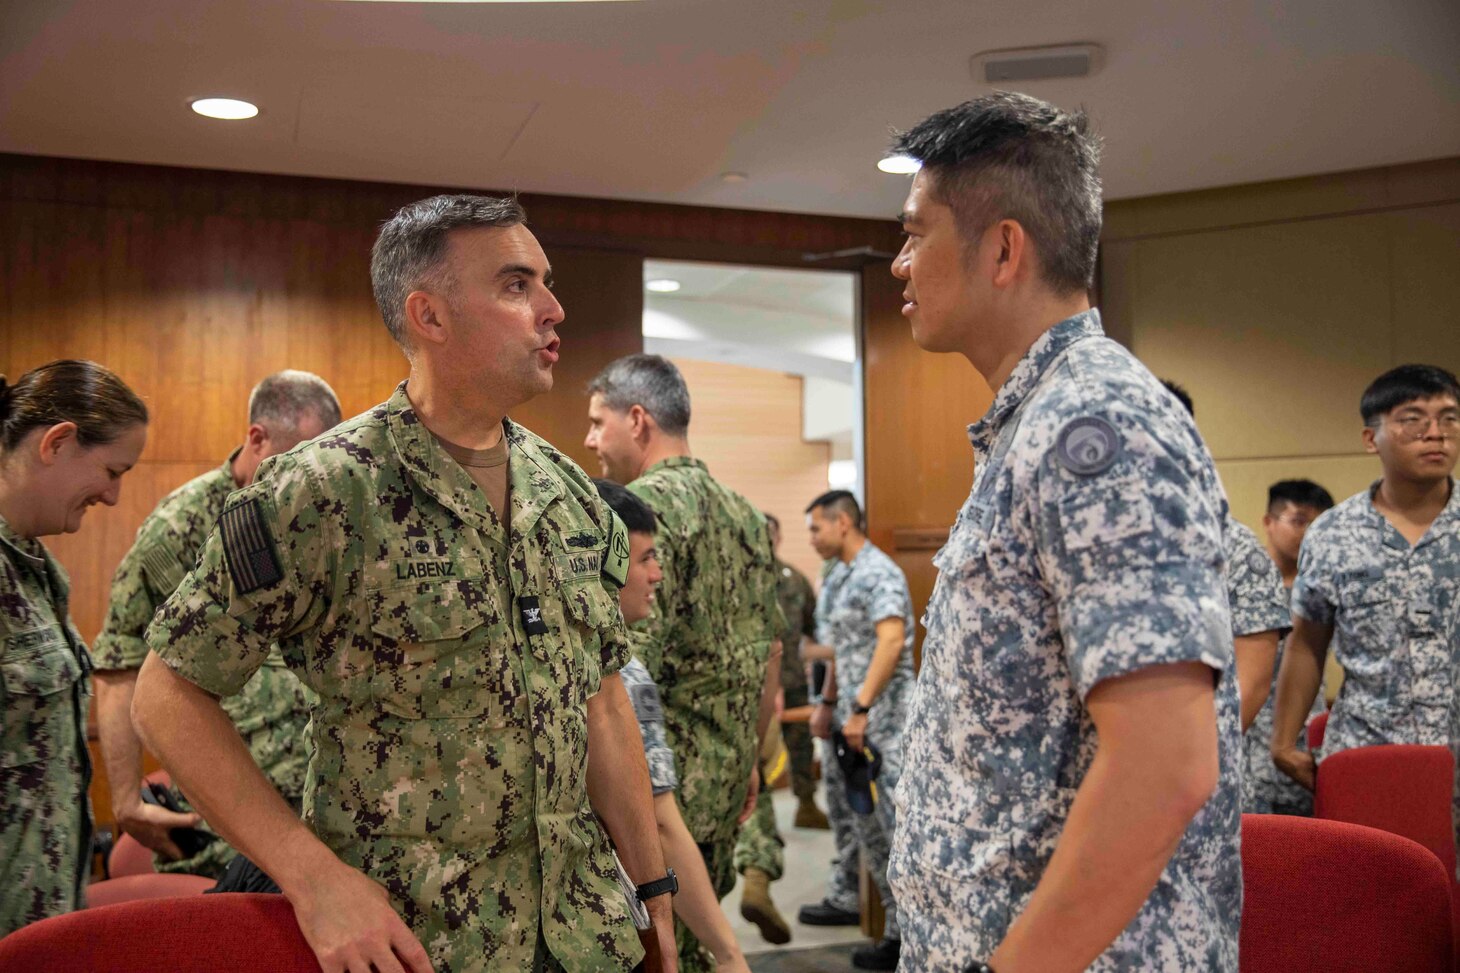 SINGAPORE (Jan. 9, 2023) Capt. Tim LaBenz, Destroyer Squadron 7 commodore, and Republic of Singapore Navy Senior Lt. Col. Daniel Koh, Deputy Commander of 3rd Flotilla, exchange words during the opening ceremony of Cooperation Afloat Readiness and Training (CARAT)/Marine Exercise (MAREX) Singapore 2022, Jan. 9, 2023. CARAT Singapore is a bilateral exercise between Singapore and the United States designed to promote regional security cooperation, maintain and strengthen maritime partnerships, and enhance maritime cooperation. In its 28th, the CARAT series is comprised of multinational exercises, designed to enhance U.S. and partner forces’ abilities to operate together in response to traditional and non-traditional maritime security challenges in the Indo-Pacific region. The Makin Island Amphibious Ready Group, comprised of amphibious assault ship USS Makin Island (LHD 8) and amphibious transport dock USS Anchorage (LPD 23) and USS John P. Murtha (LPD 26), is operating in the U.S. 7th Fleet area of operations with the embarked 13th Marine Expeditionary Unit to enhance interoperability with Allies and partners and serve as a ready-response force to defend peace and maintain stability in the Indo-Pacific region. (U.S. Navy photo by Mass Communication Specialist 3rd Class Kendra Helmbrecht)